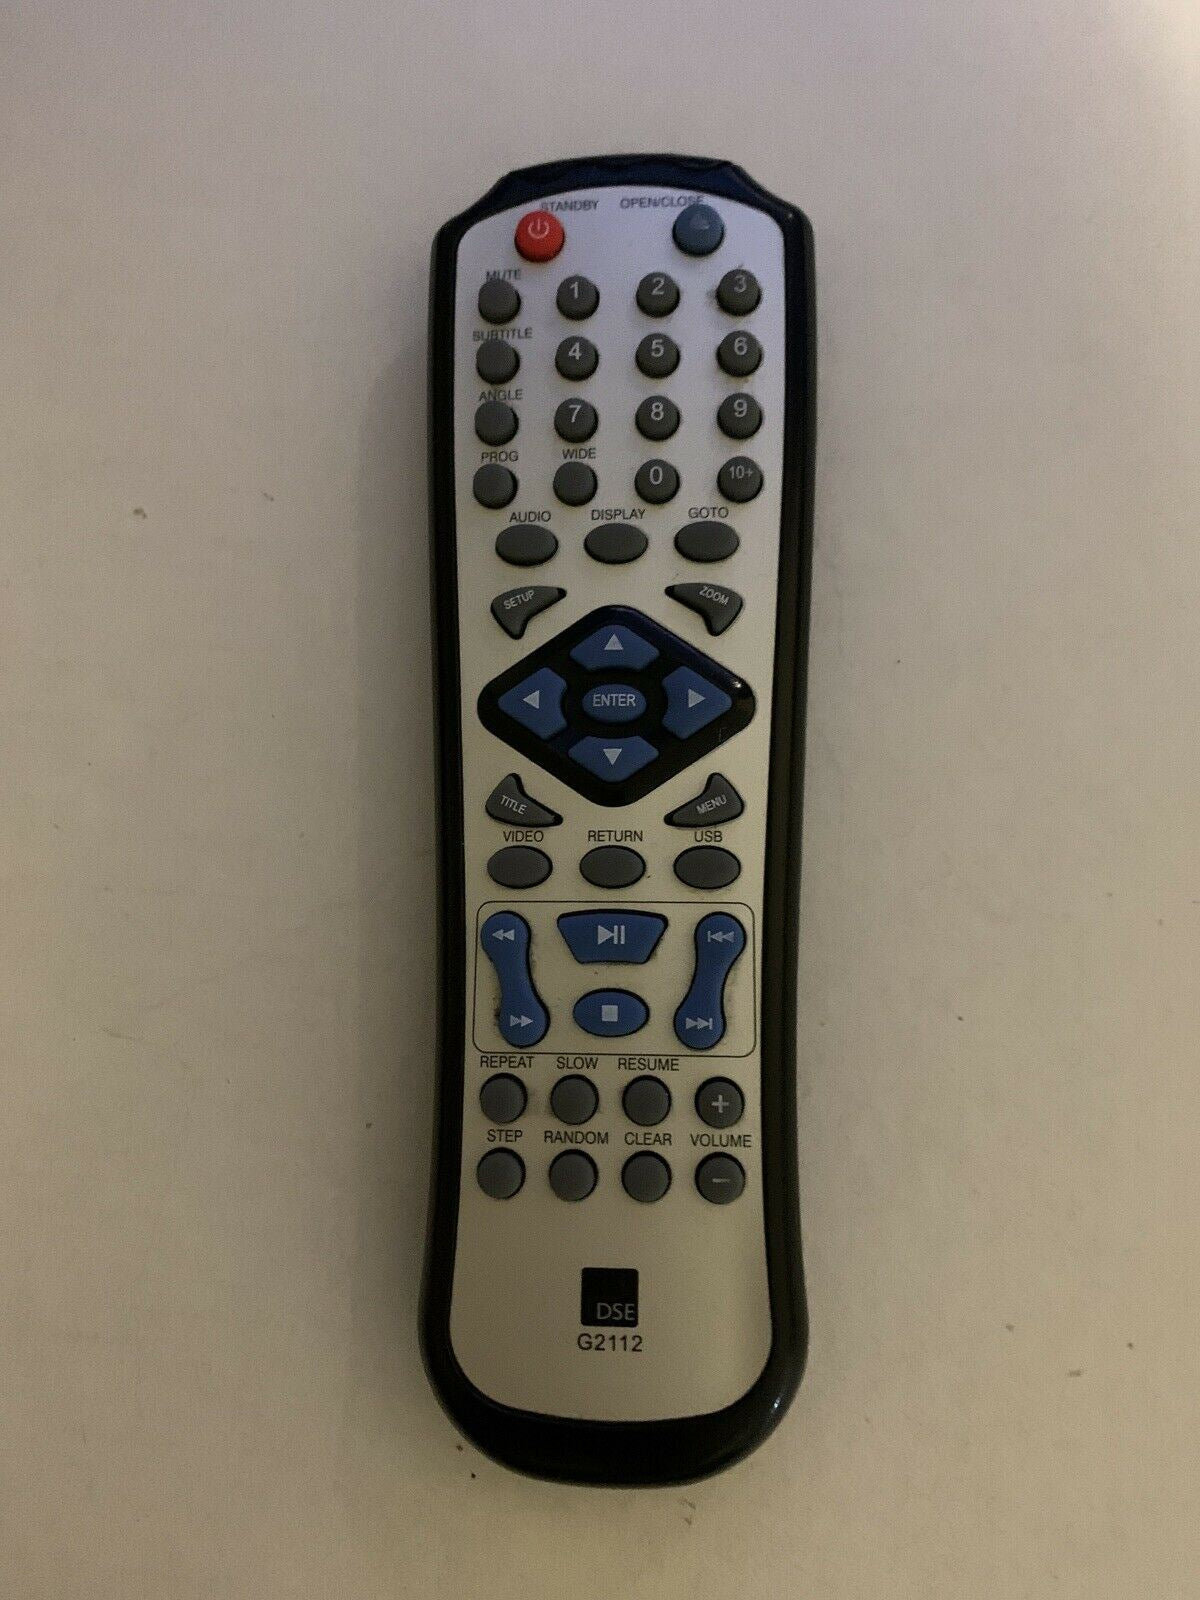 Dick Smith Electronic DSE G2112 JX-3033B(1) Remote Control